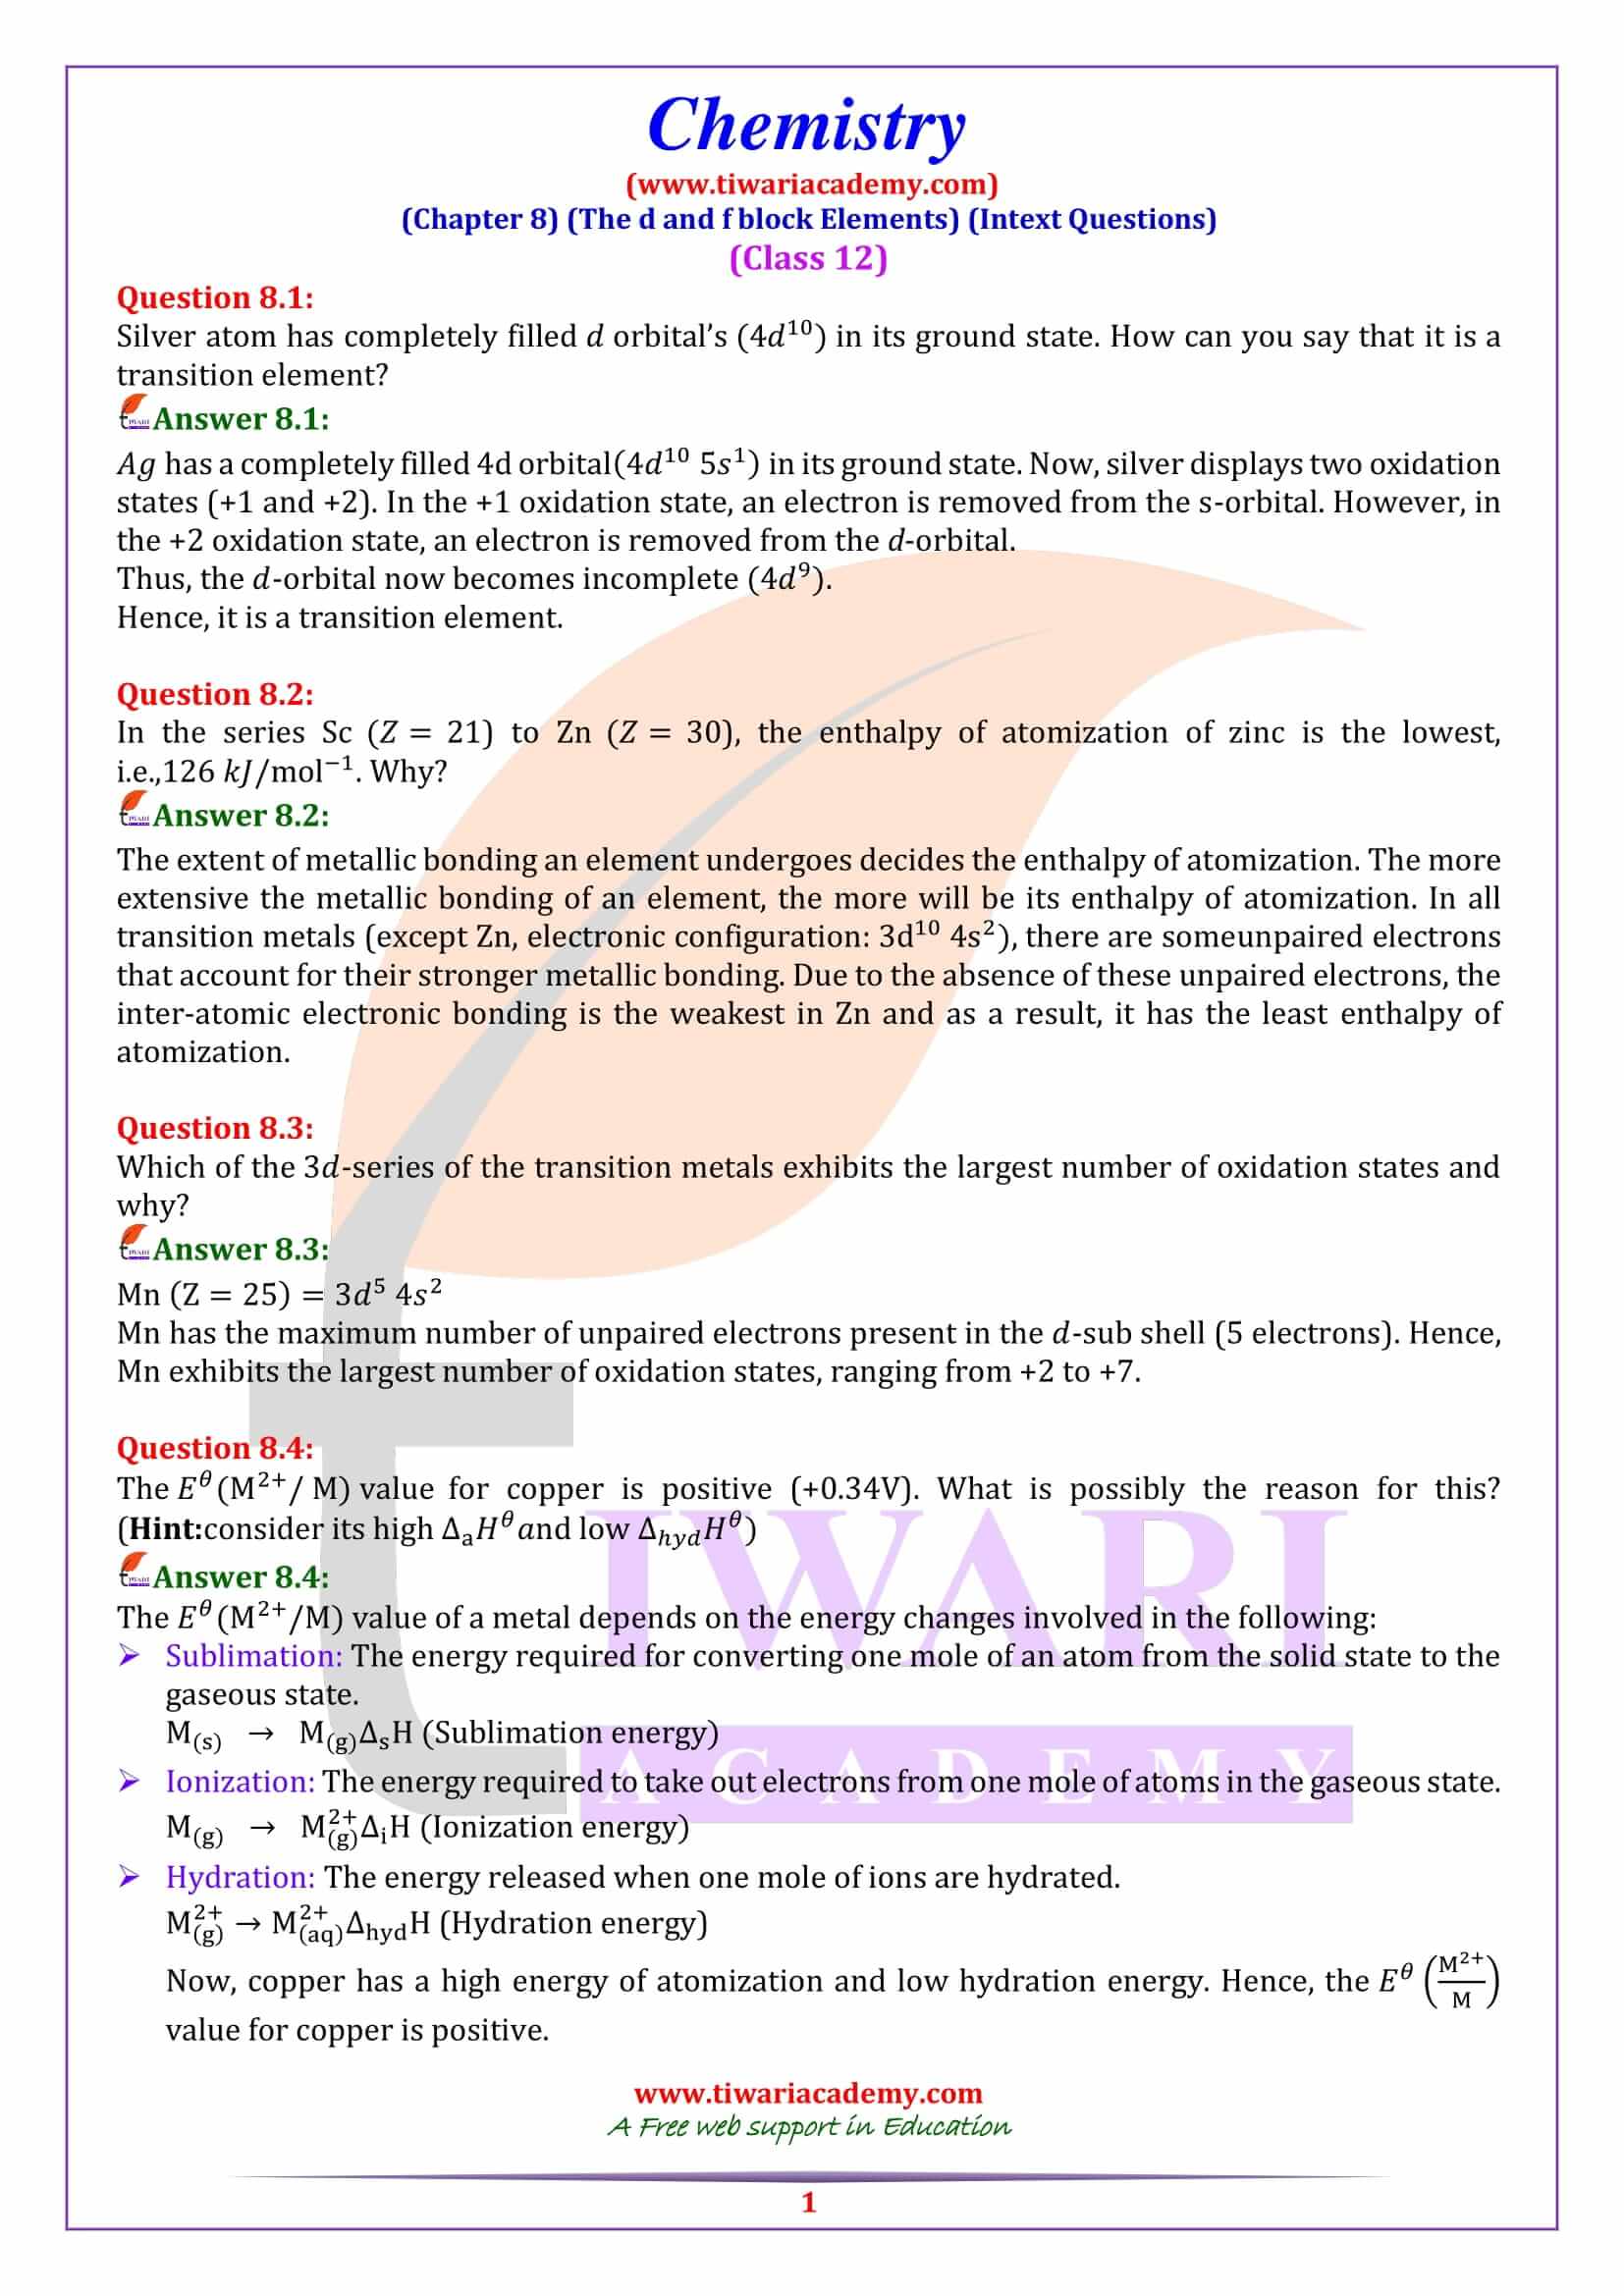 NCERT Solutions for Class 12 Chemistry Chapter 8 Intext Questions